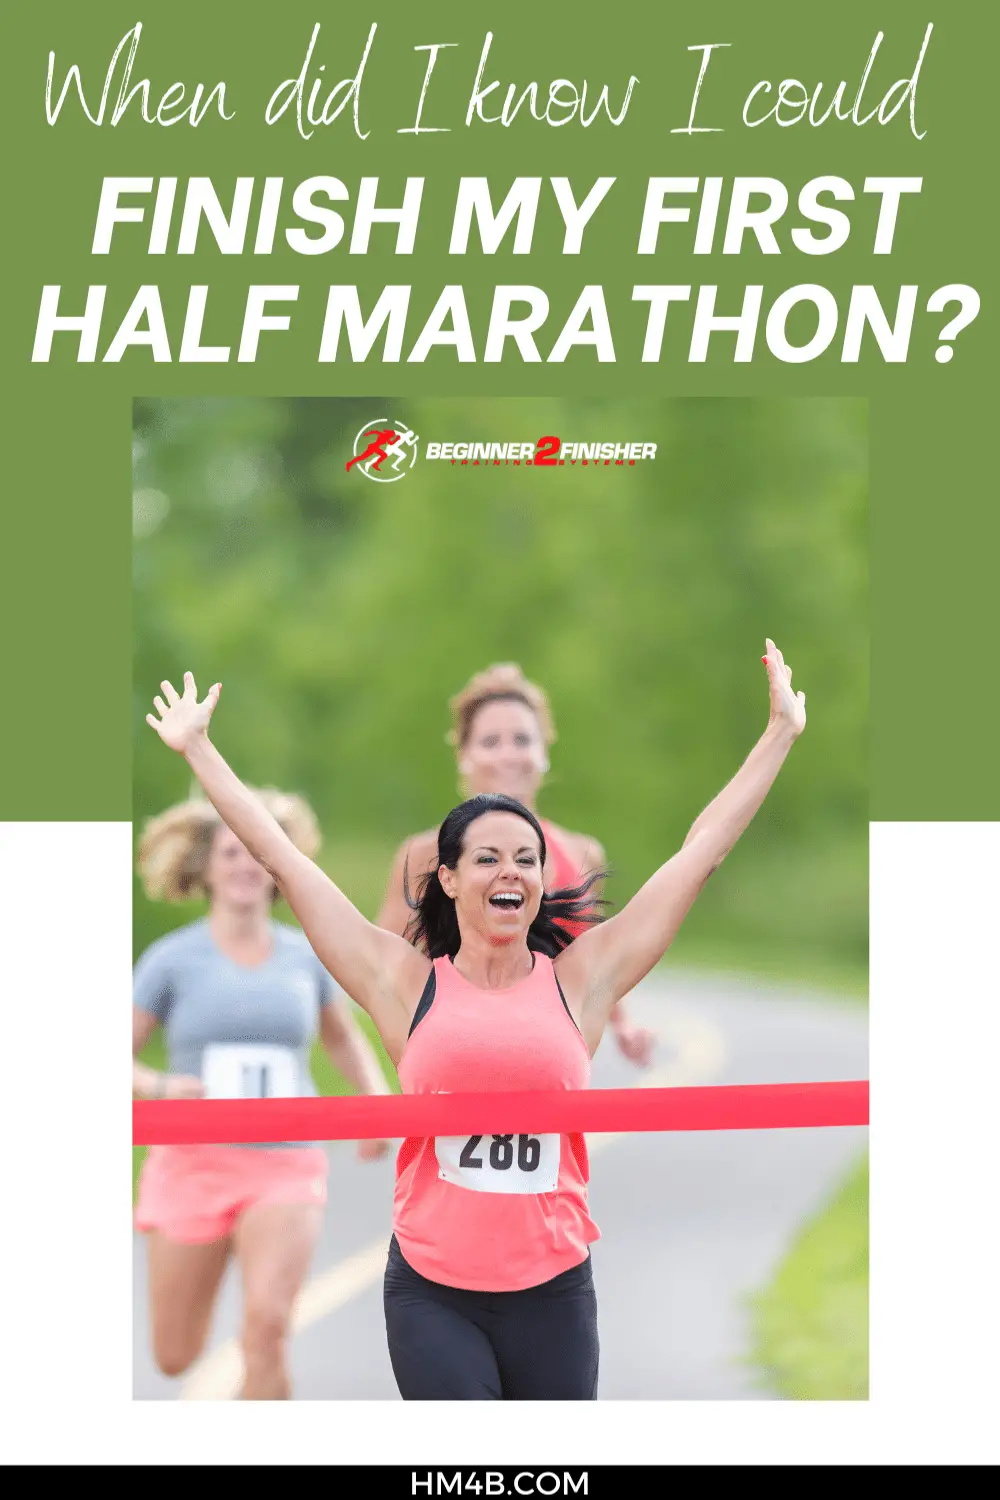 When did I know I could finish my first Half Marathon?